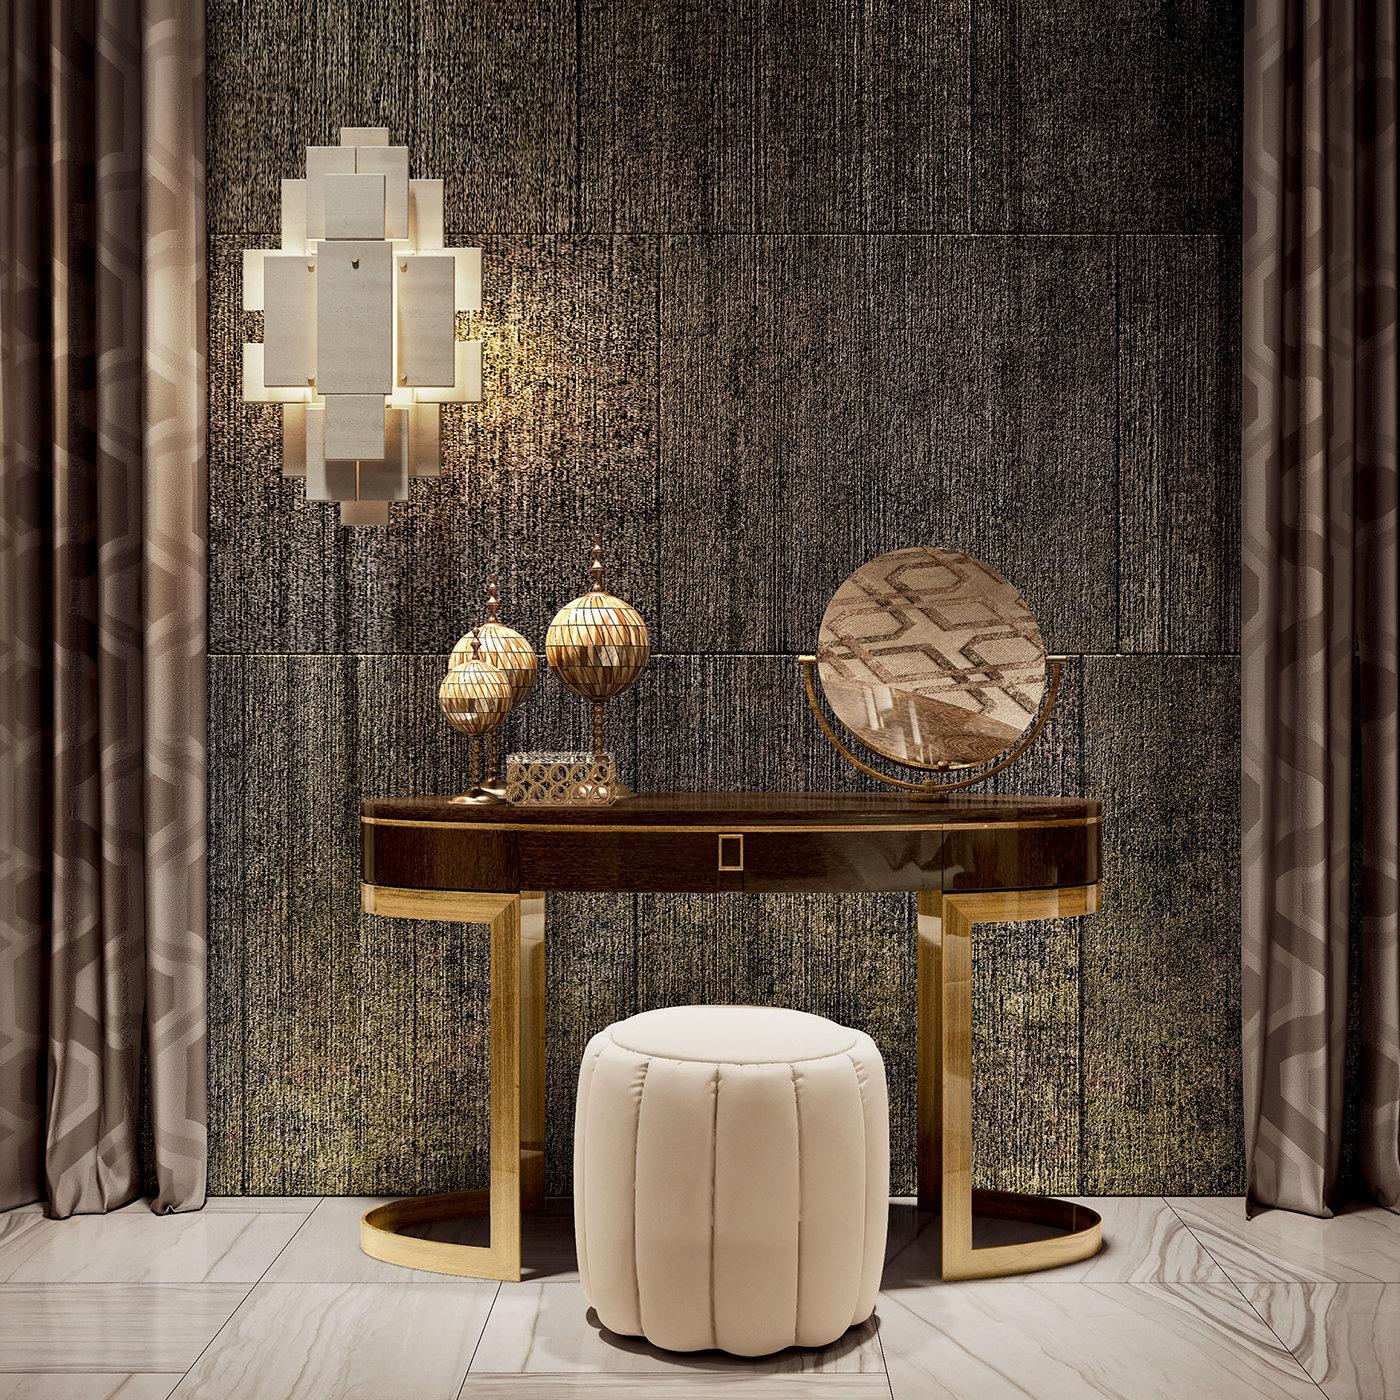 Pampering, grooming or applying and removing makeup can become all that that more elegant when done in front of this gorgeous wooden vanity table. The table rests on a brushed bronze, rounded structure, while an integrated round mirror and a drawer